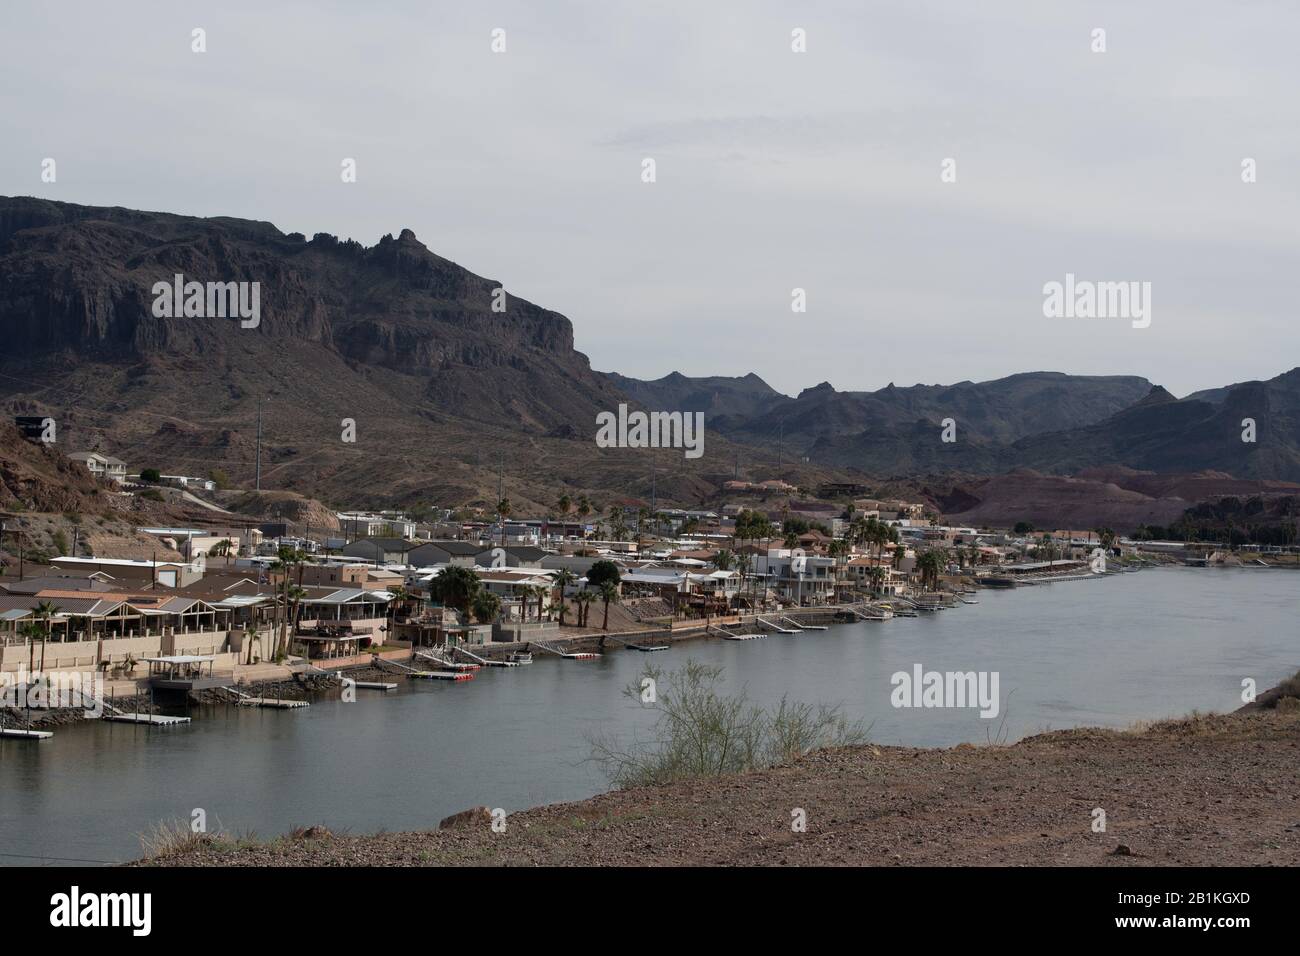 The village of Parker dam. located below the dam, has access to teh Colorado River. Stock Photo